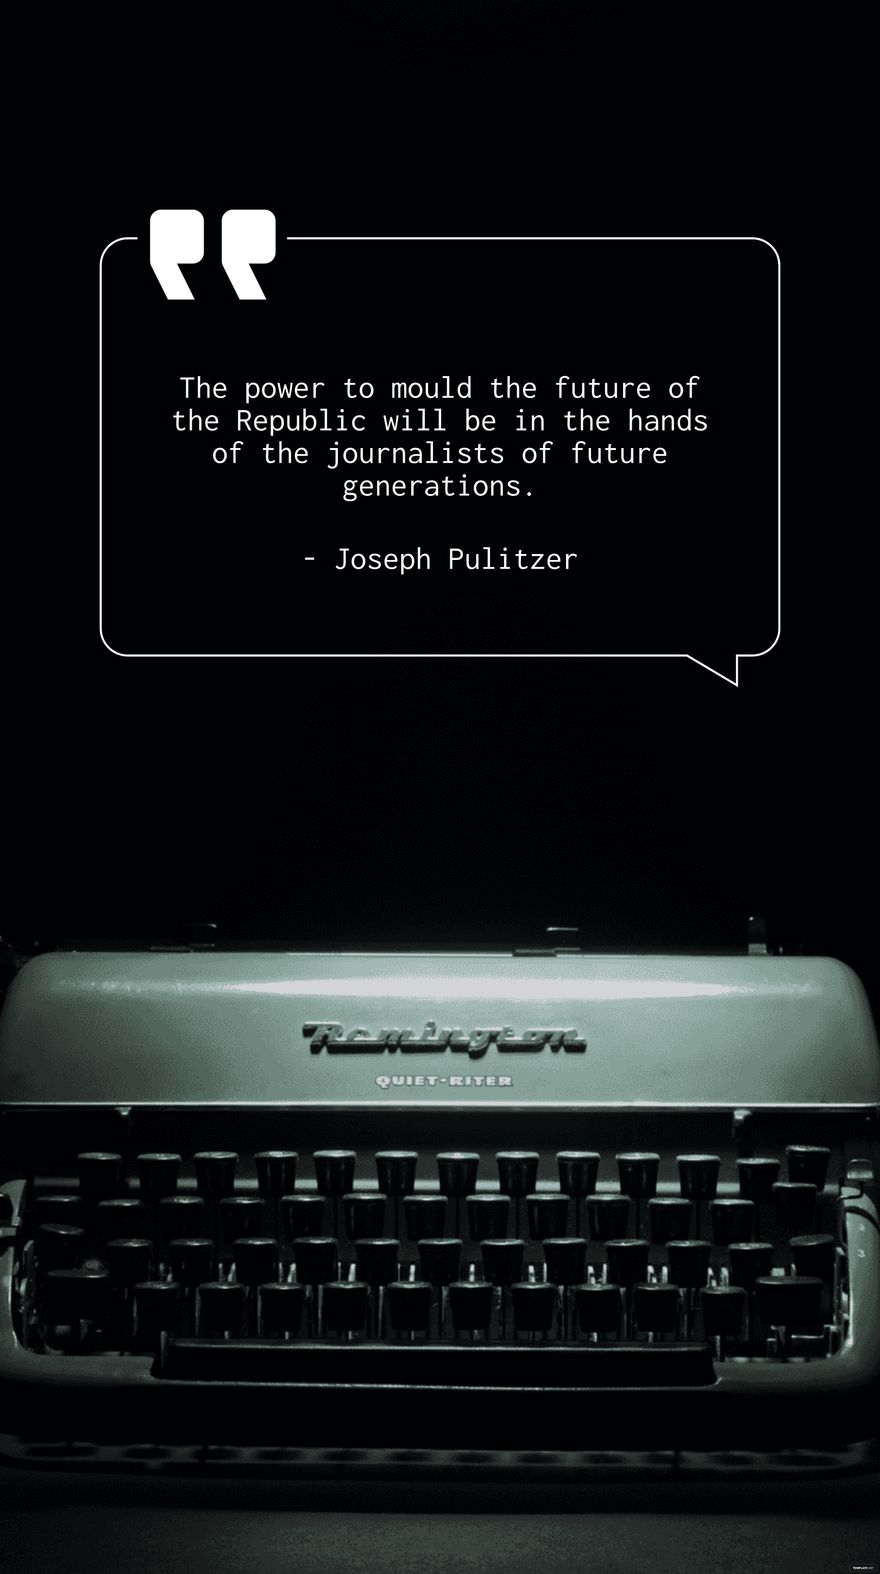 Free The power to mould the future of the Republic will be in the hands of the journalists of future generations. - Joseph Pulitzer in JPEG